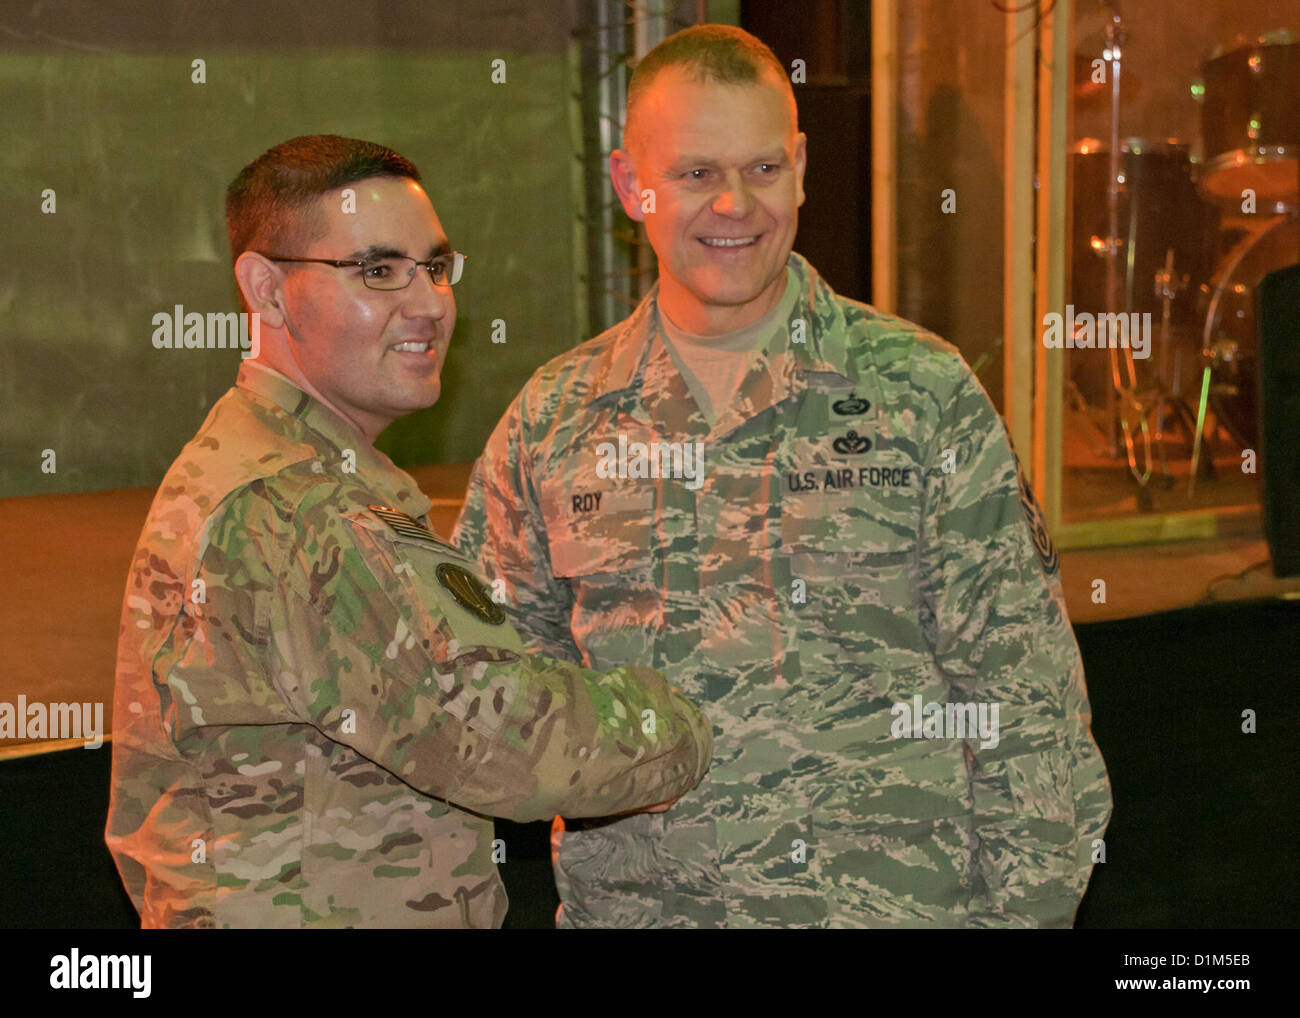 Chief Master Sergeant of the Air Force James A. Roy shakes hands with an airman assigned to NATO Training Mission-Afghanistan at Camp Eggers, Kabul, during an Airmen’s Call on camp Dec. 28. ( Credit Image: © airforce army navy news / Alamy) Stock Photo